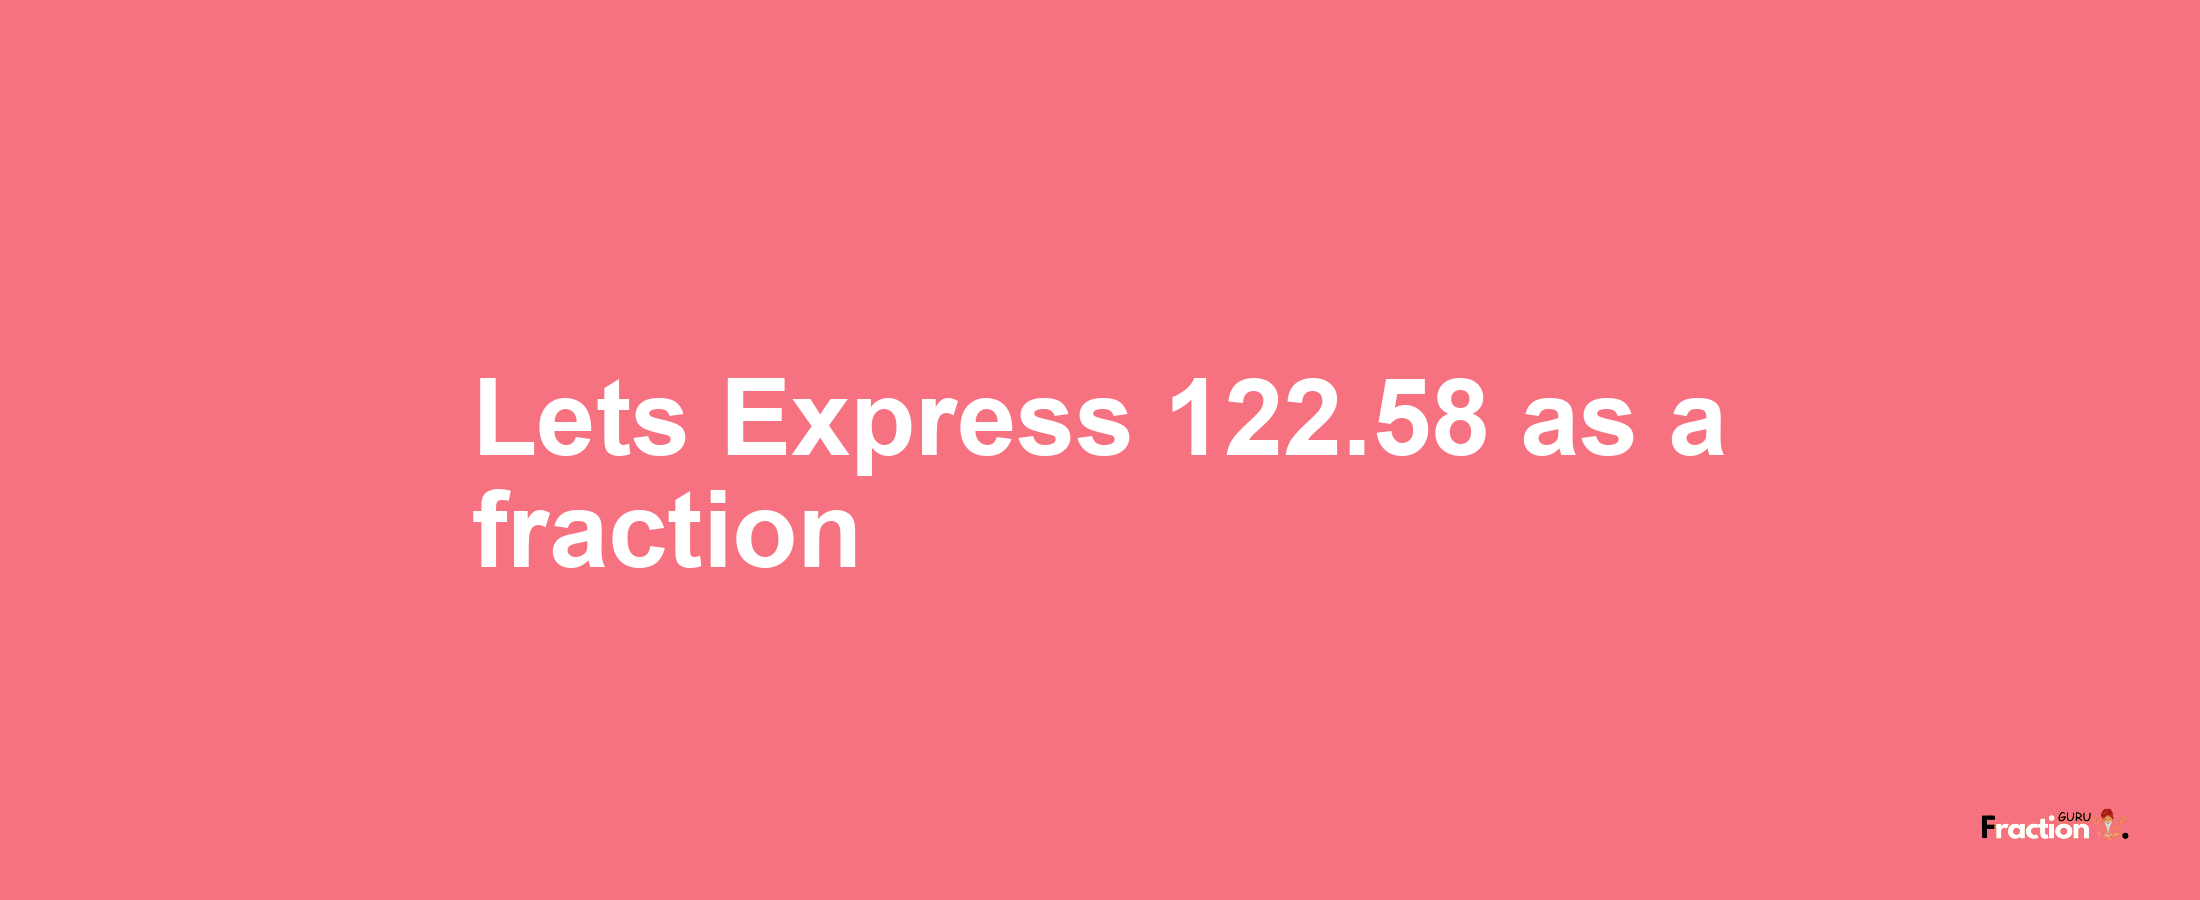 Lets Express 122.58 as afraction